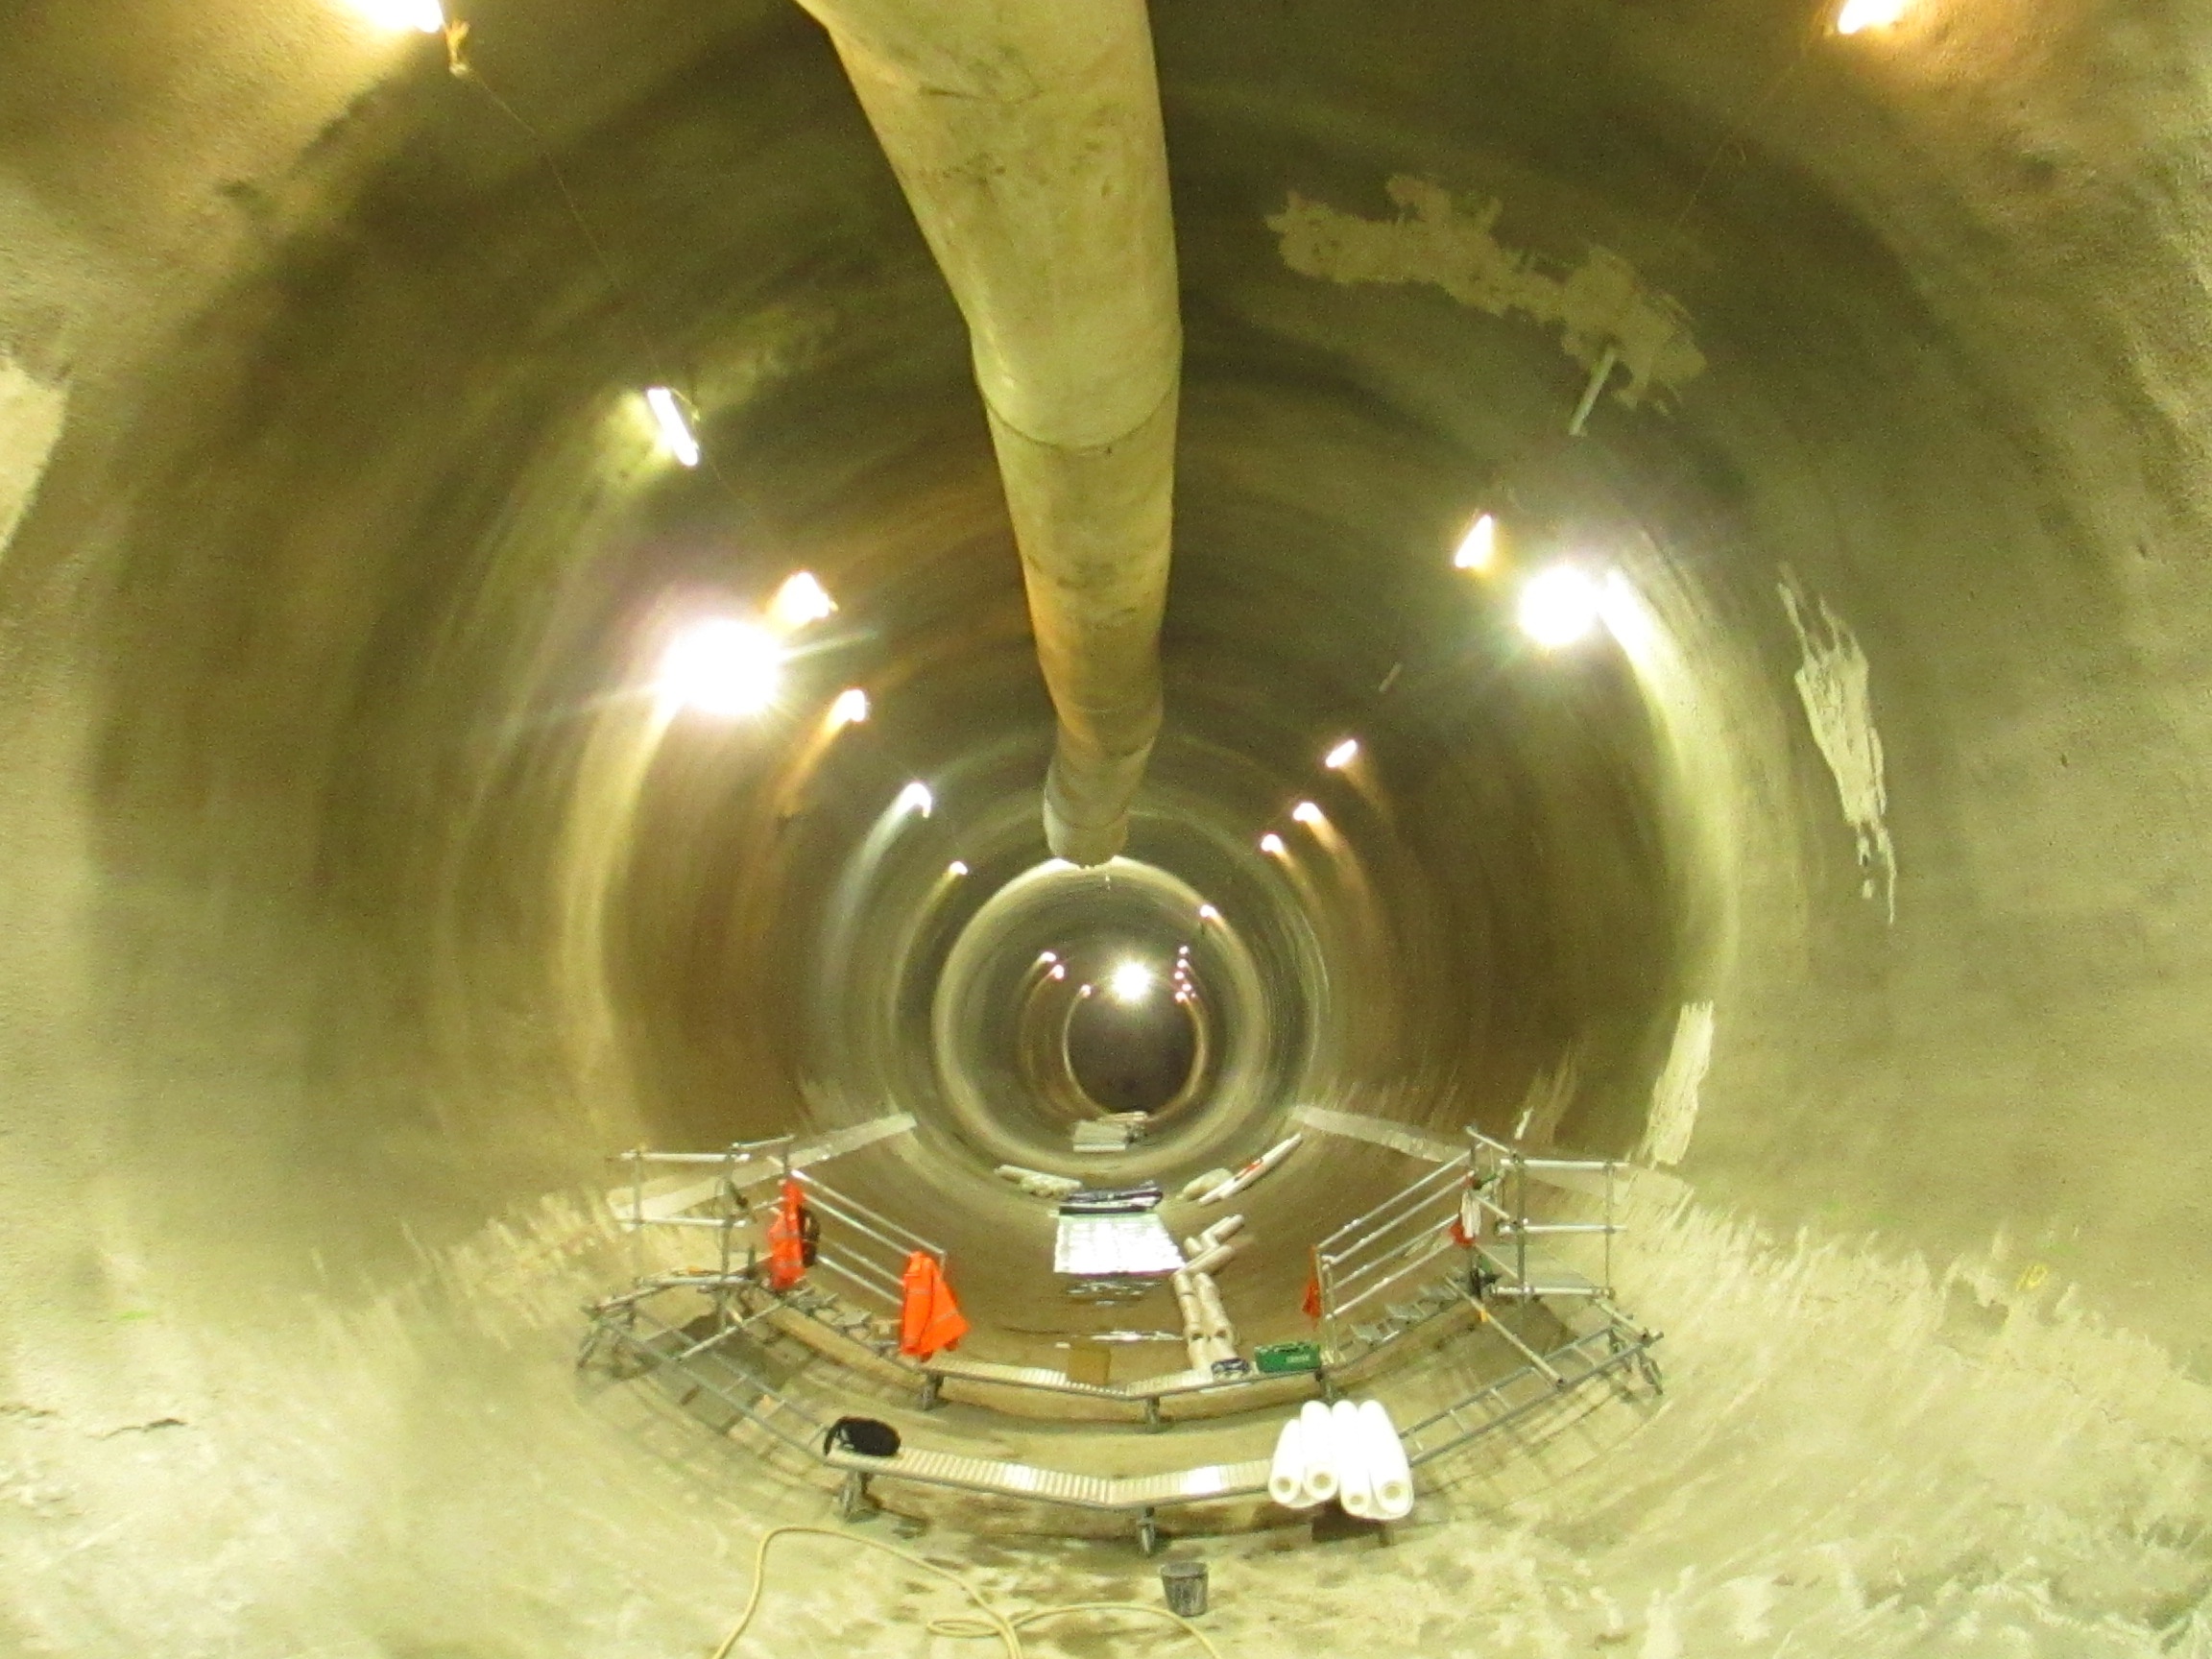 How Many Pringles Can You Fit In Crossrail? (4/6)